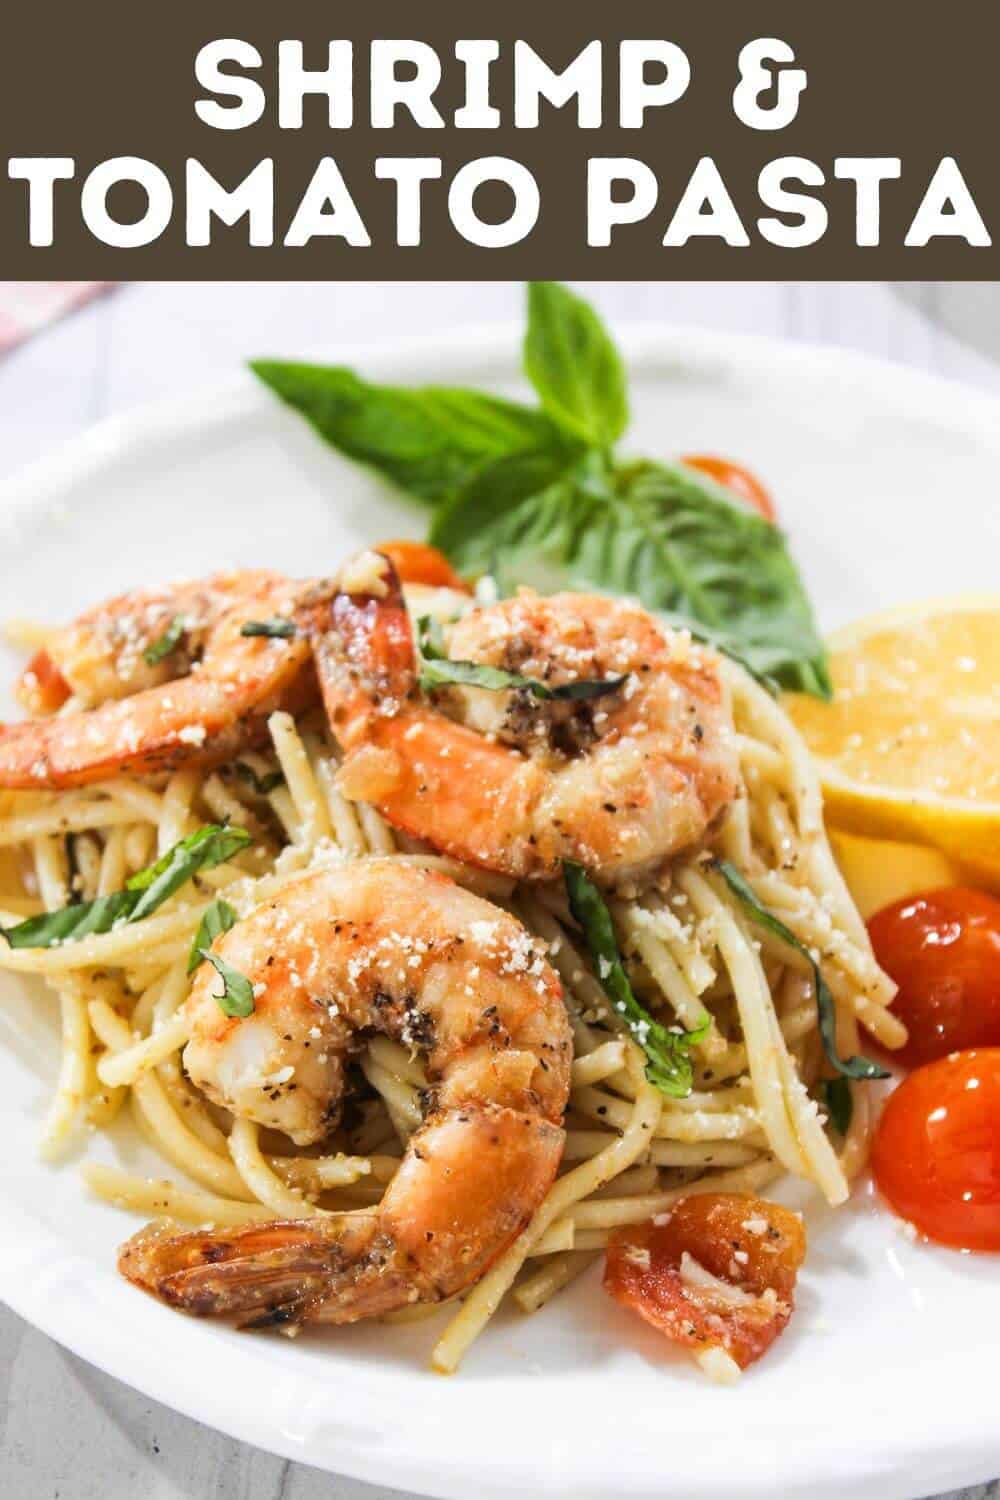 Shrimp and tomato pasta on a plate.